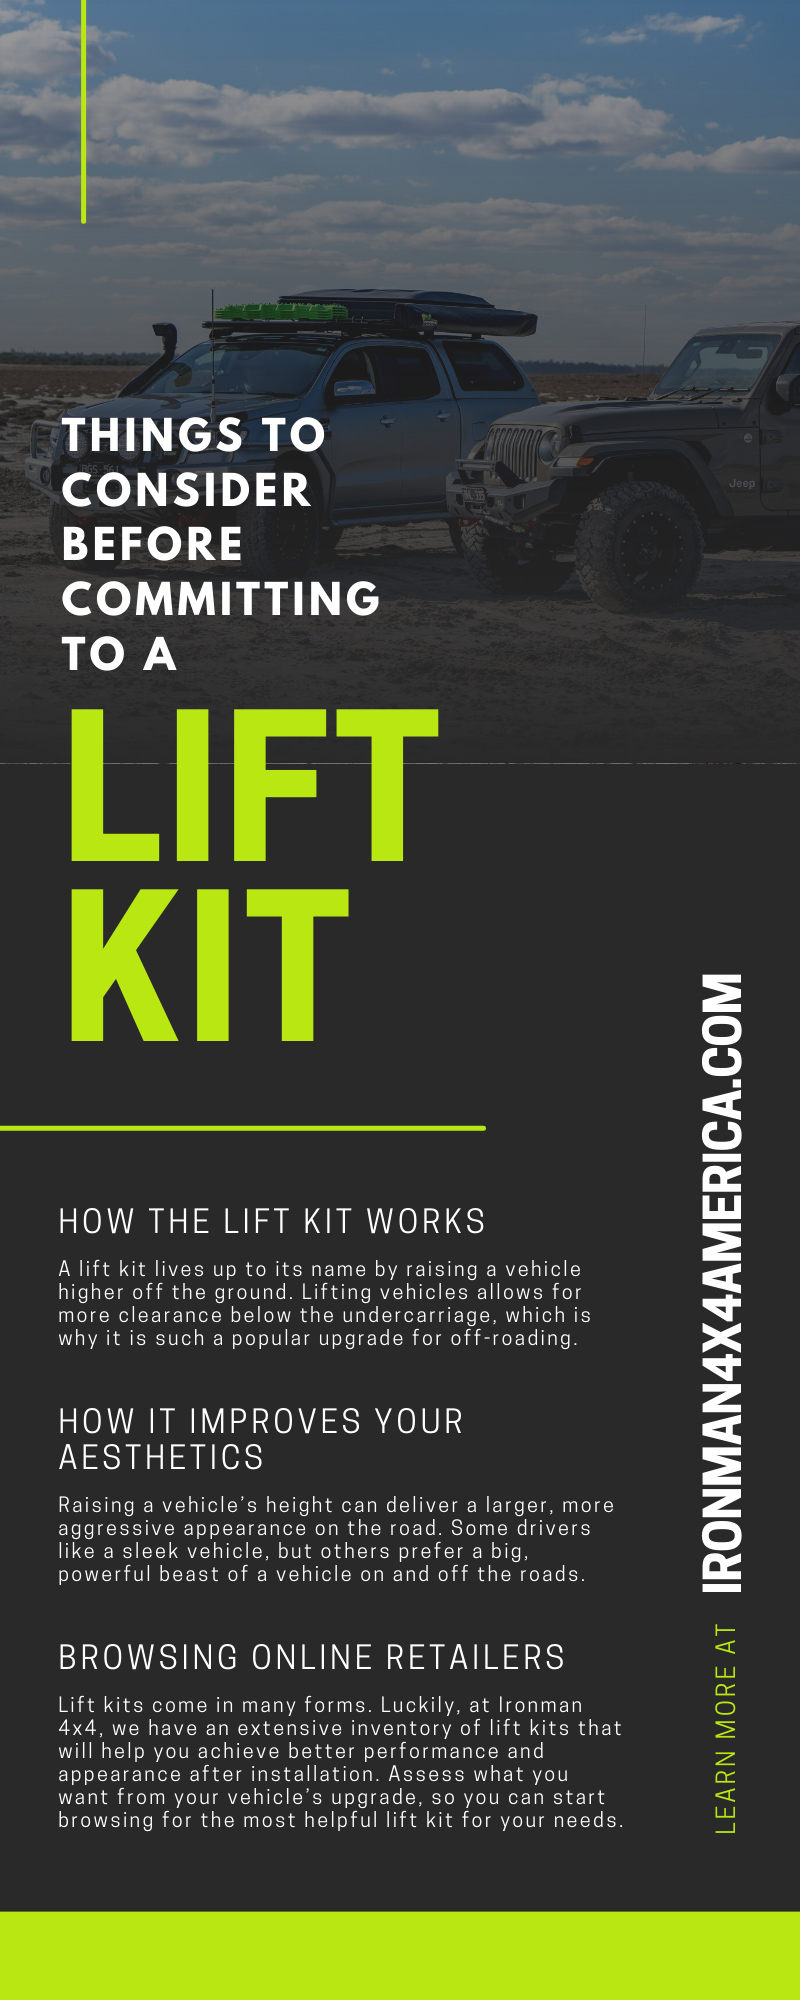 Things To Consider Before Committing to a Lift Kit